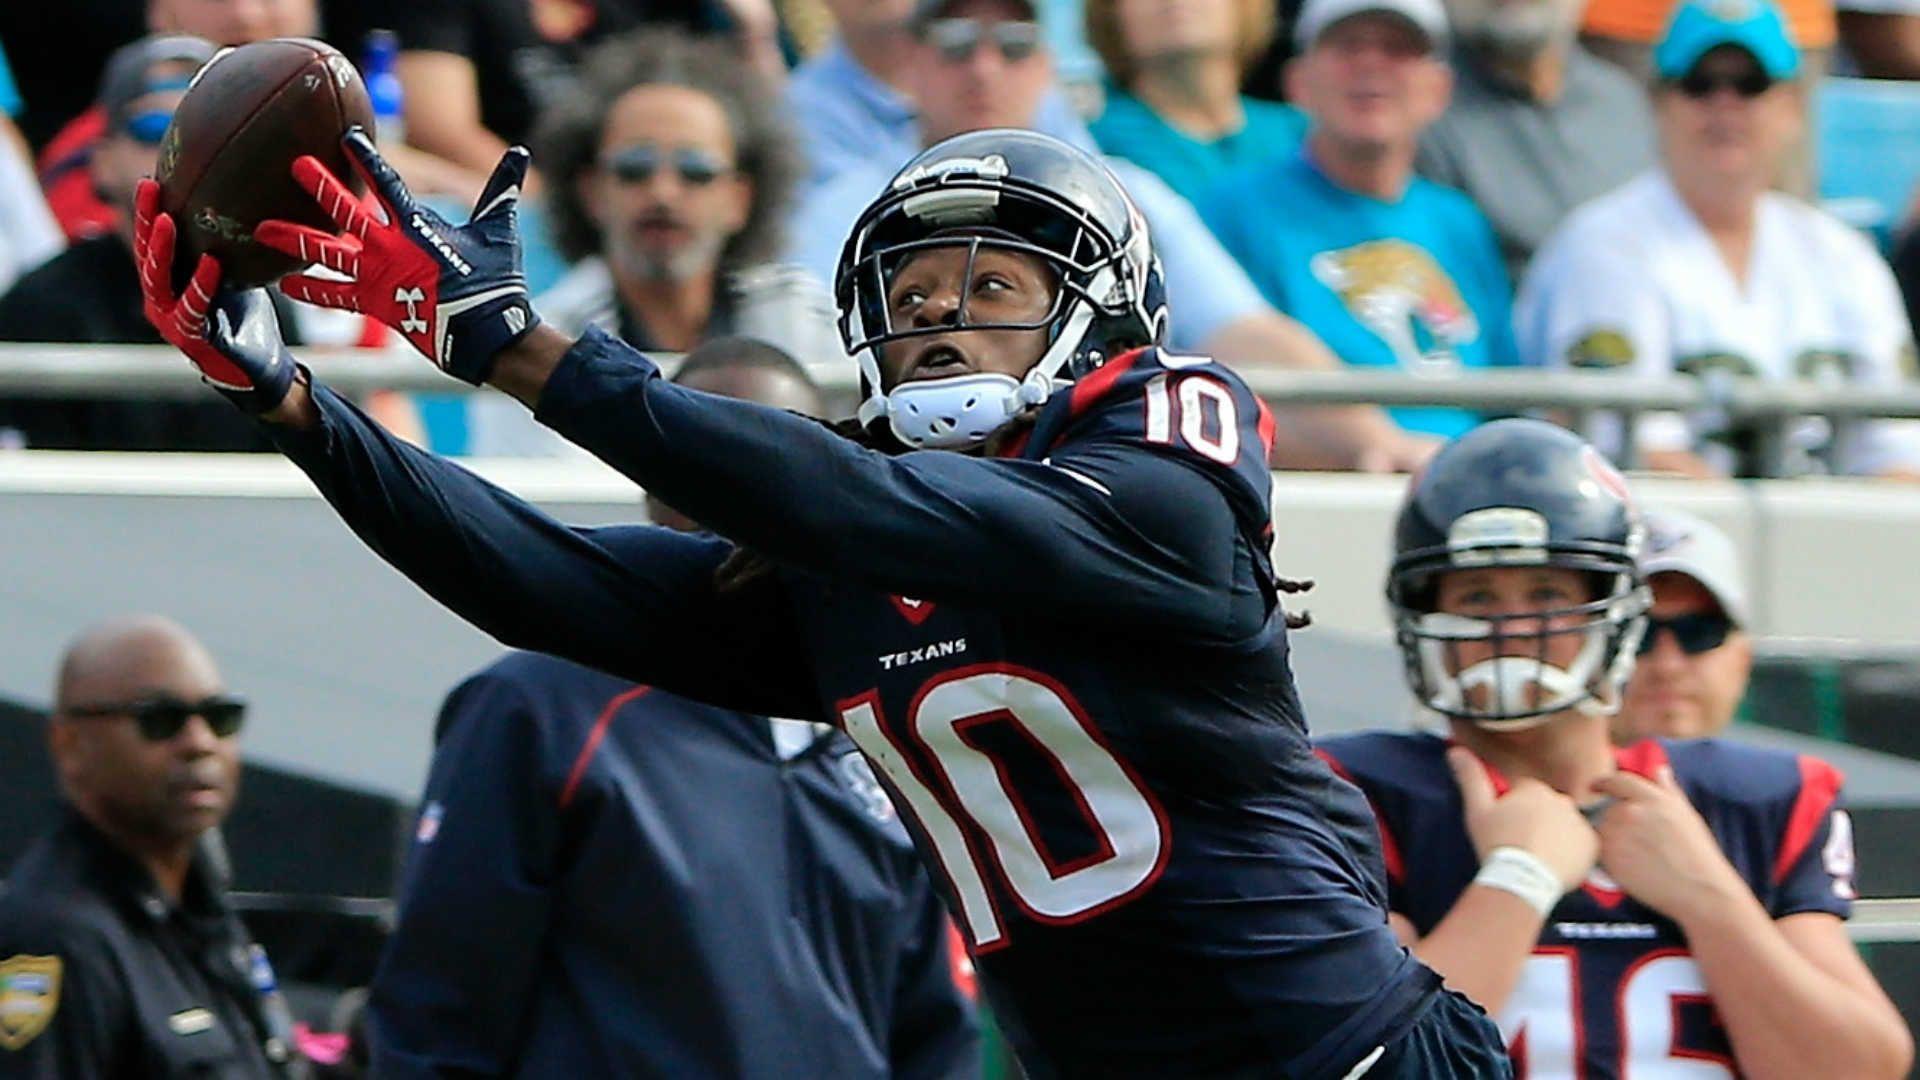 Patriots reportedly tried to land Texans receiver DeAndre Hopkins